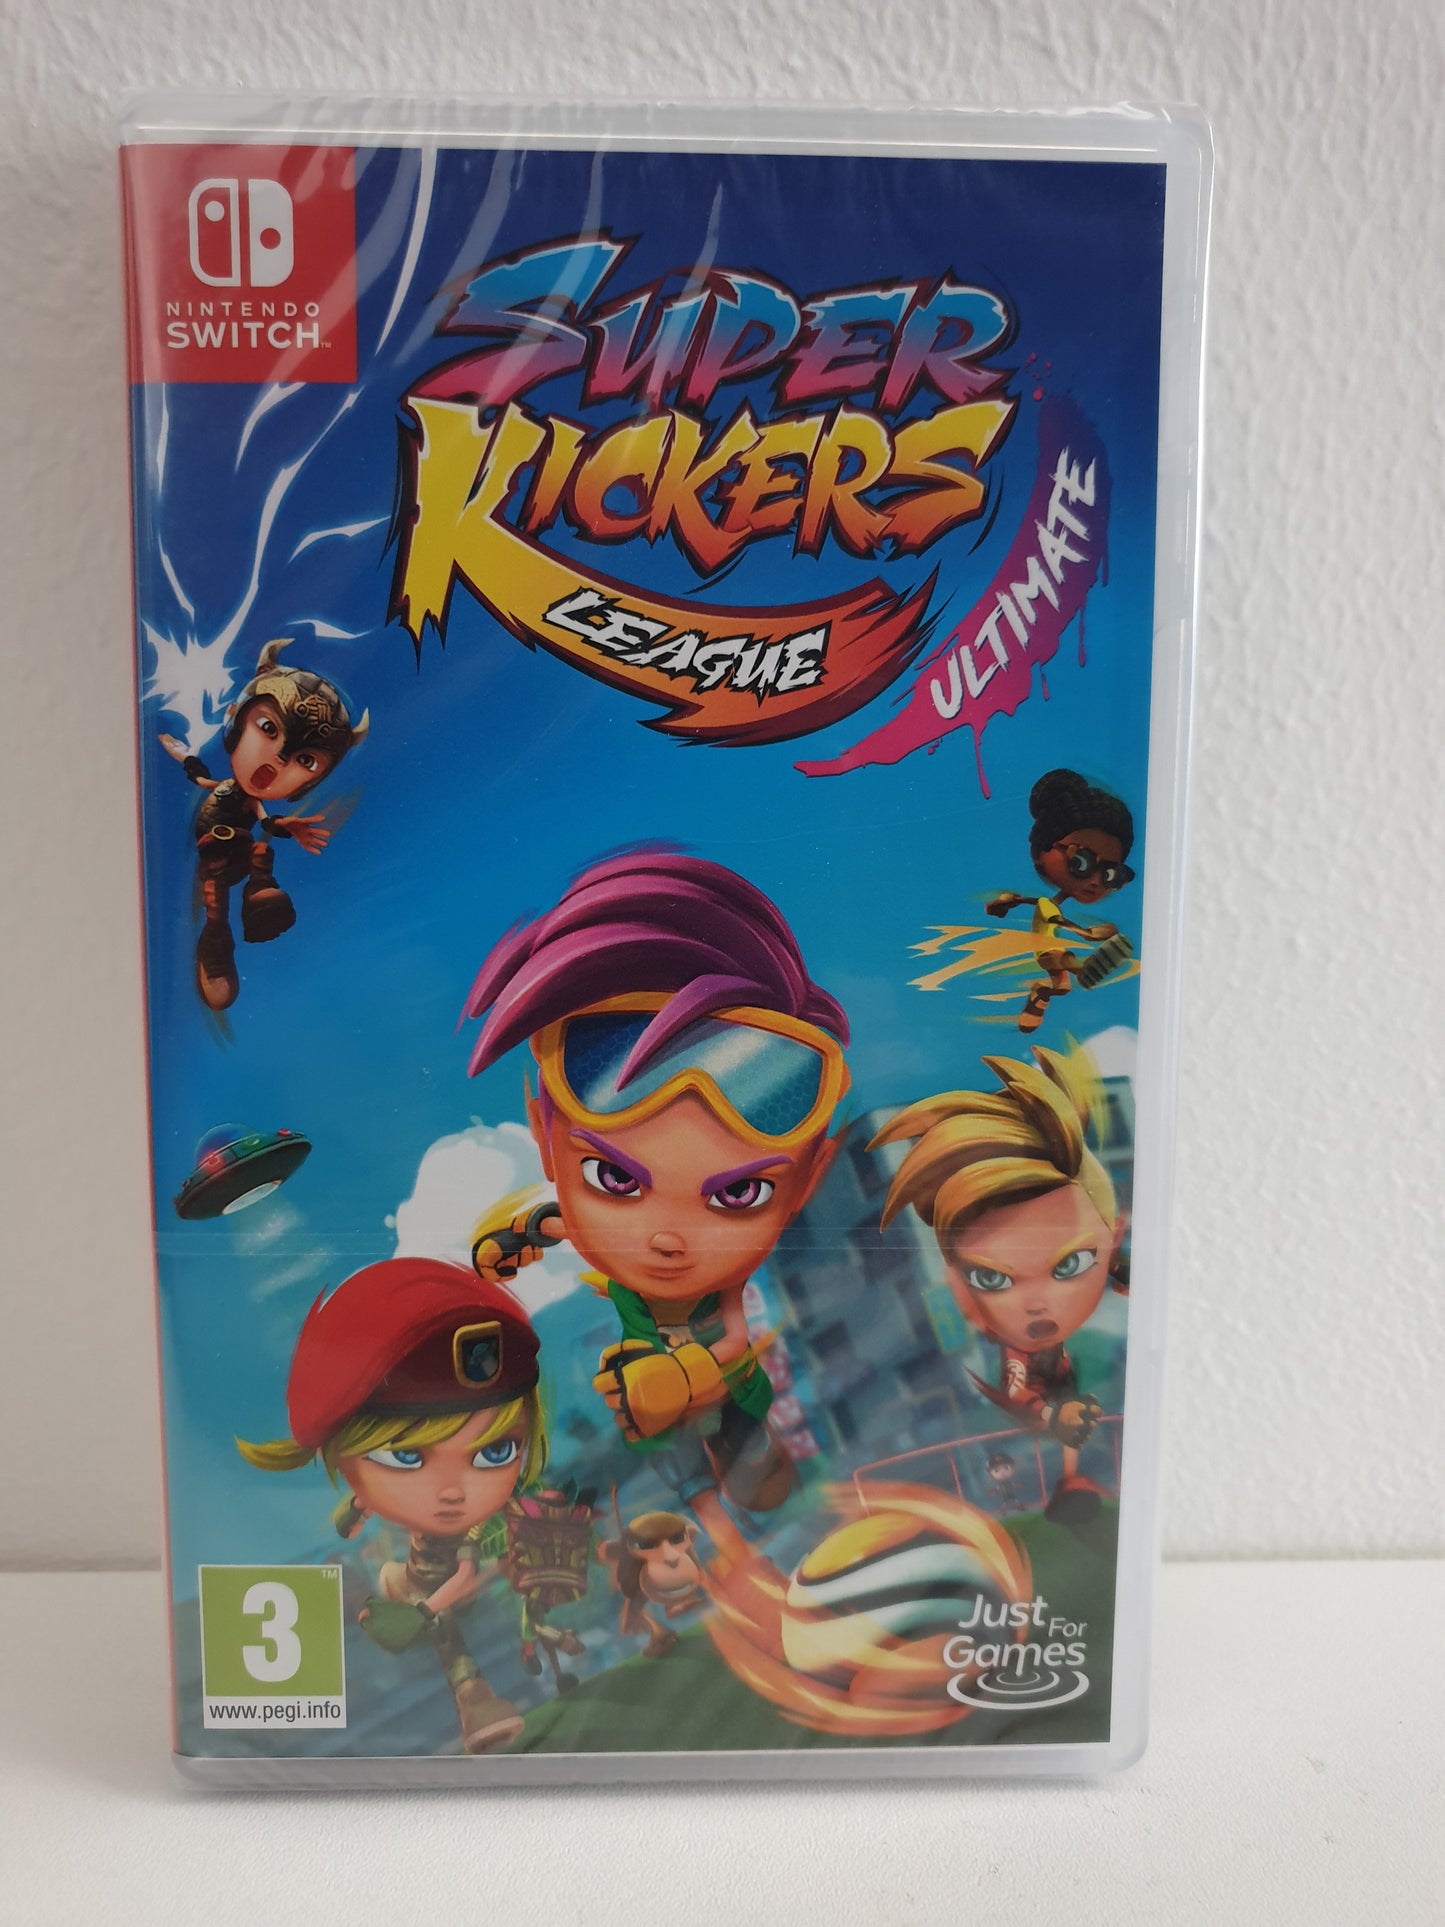 Super Kickers League Ultimate Switch - Neuf sous blister